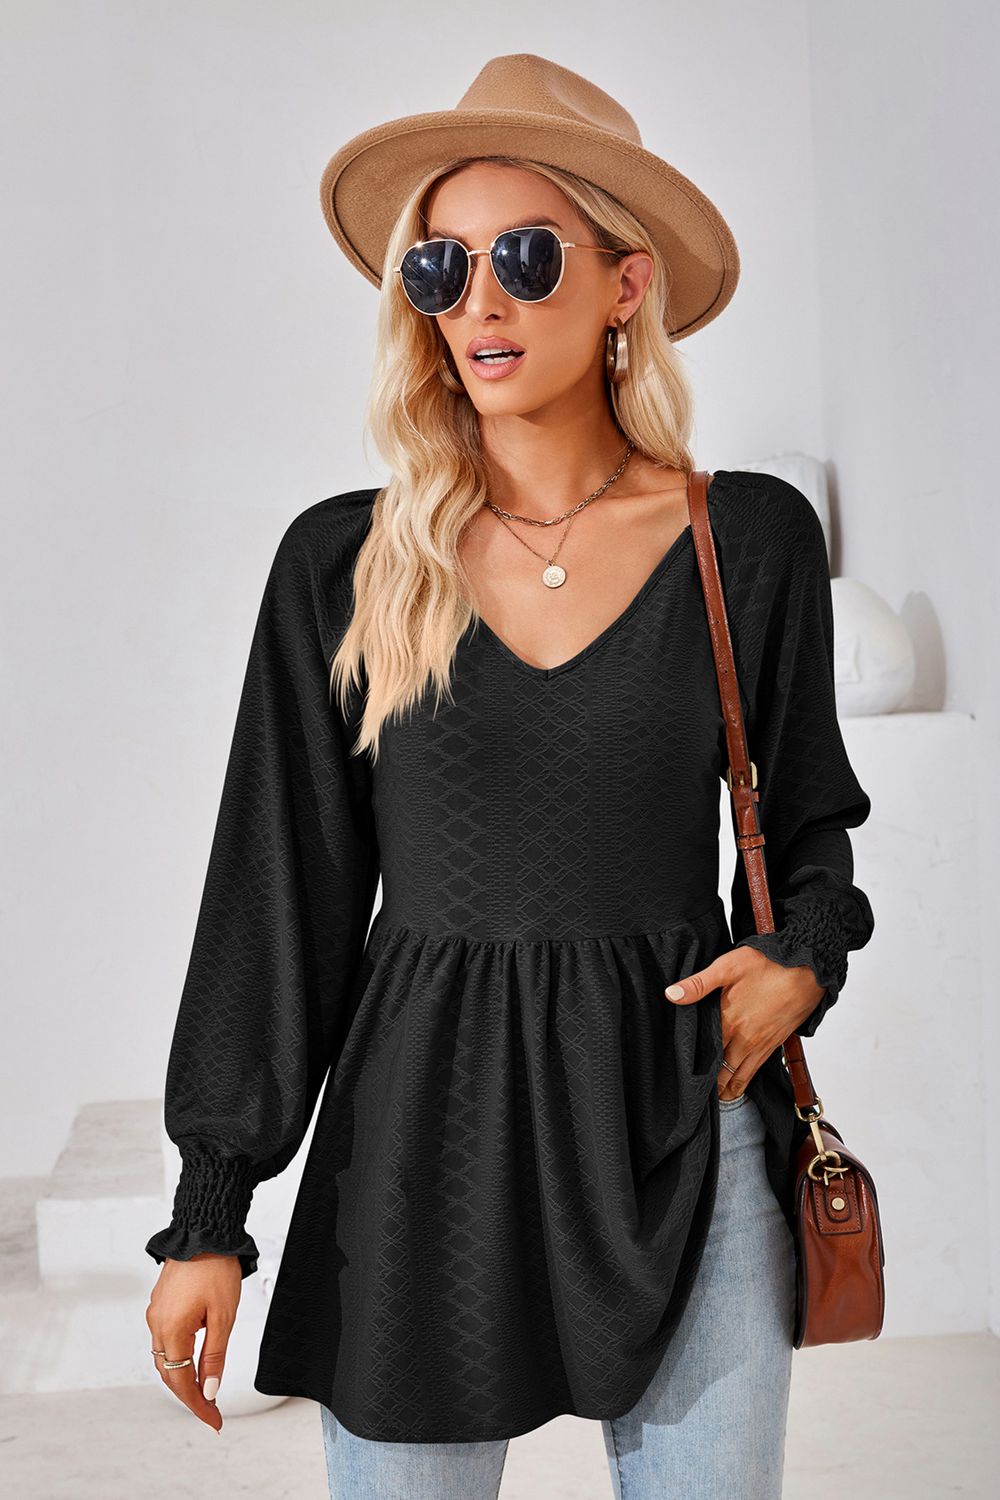 V-Neck Lantern Sleeve Blouse - Black / S - Women’s Clothing & Accessories - Shirts & Tops - 19 - 2024